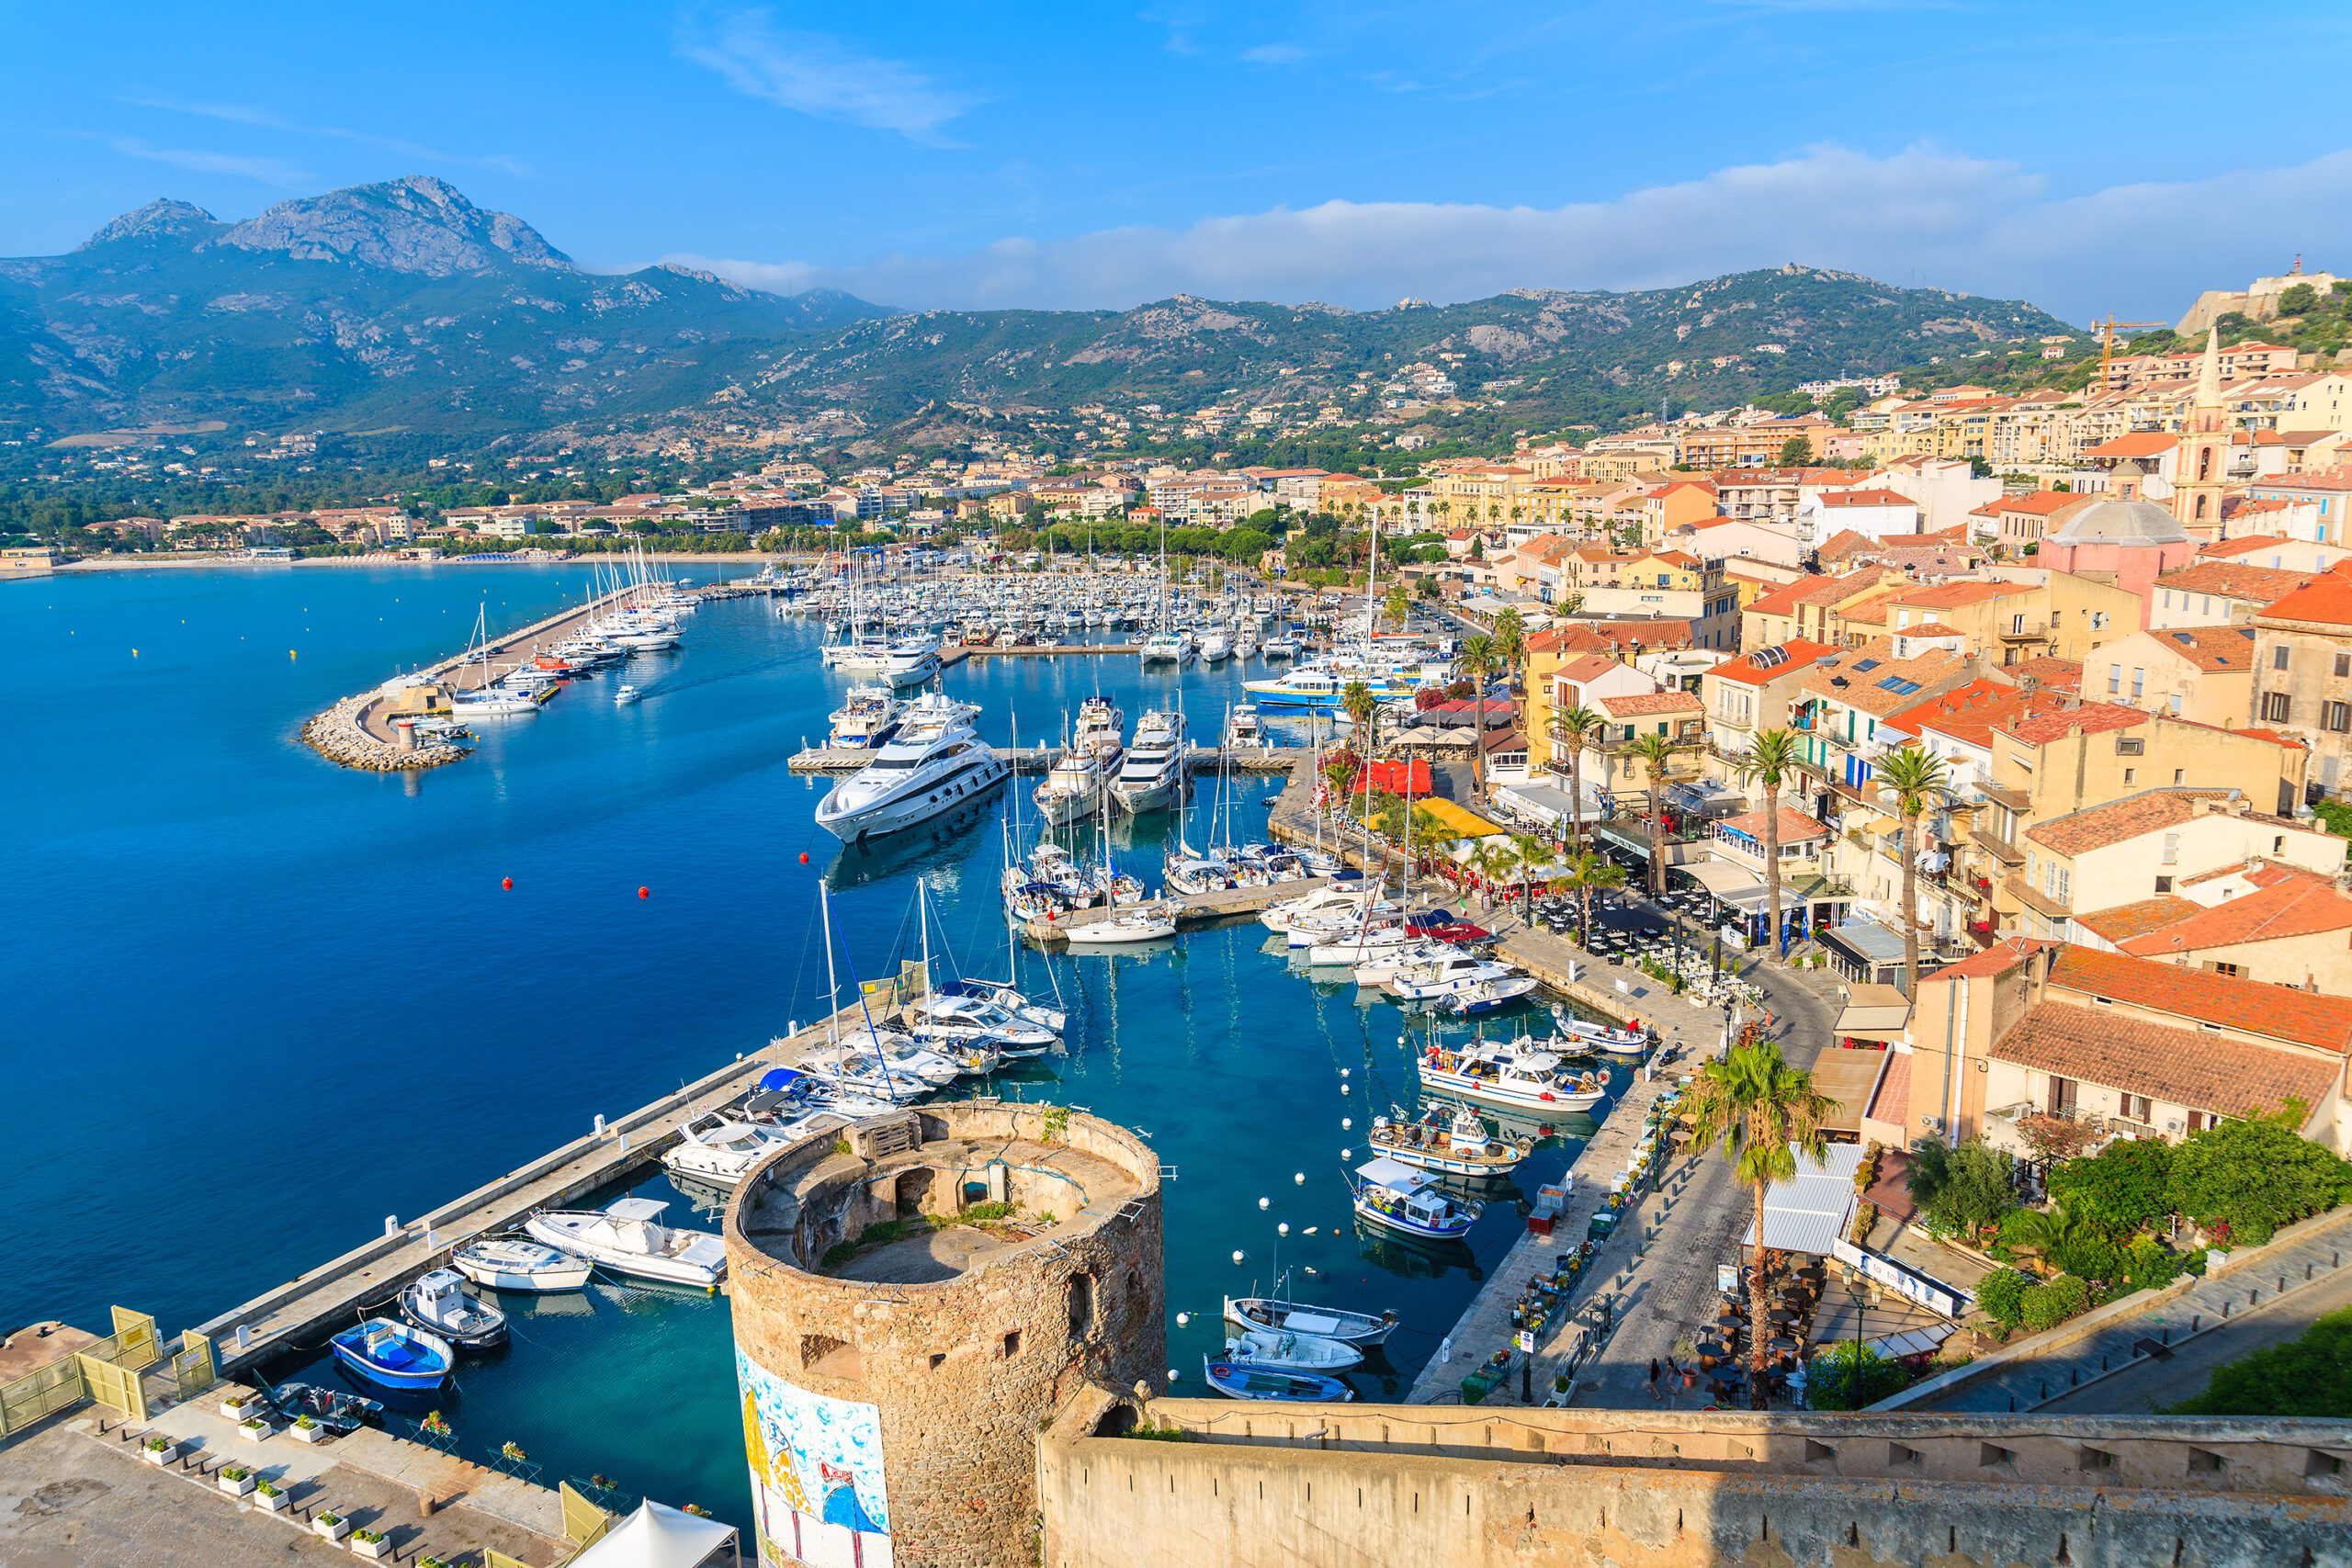 View of the port of Calvi in Corsica and its colorful houses